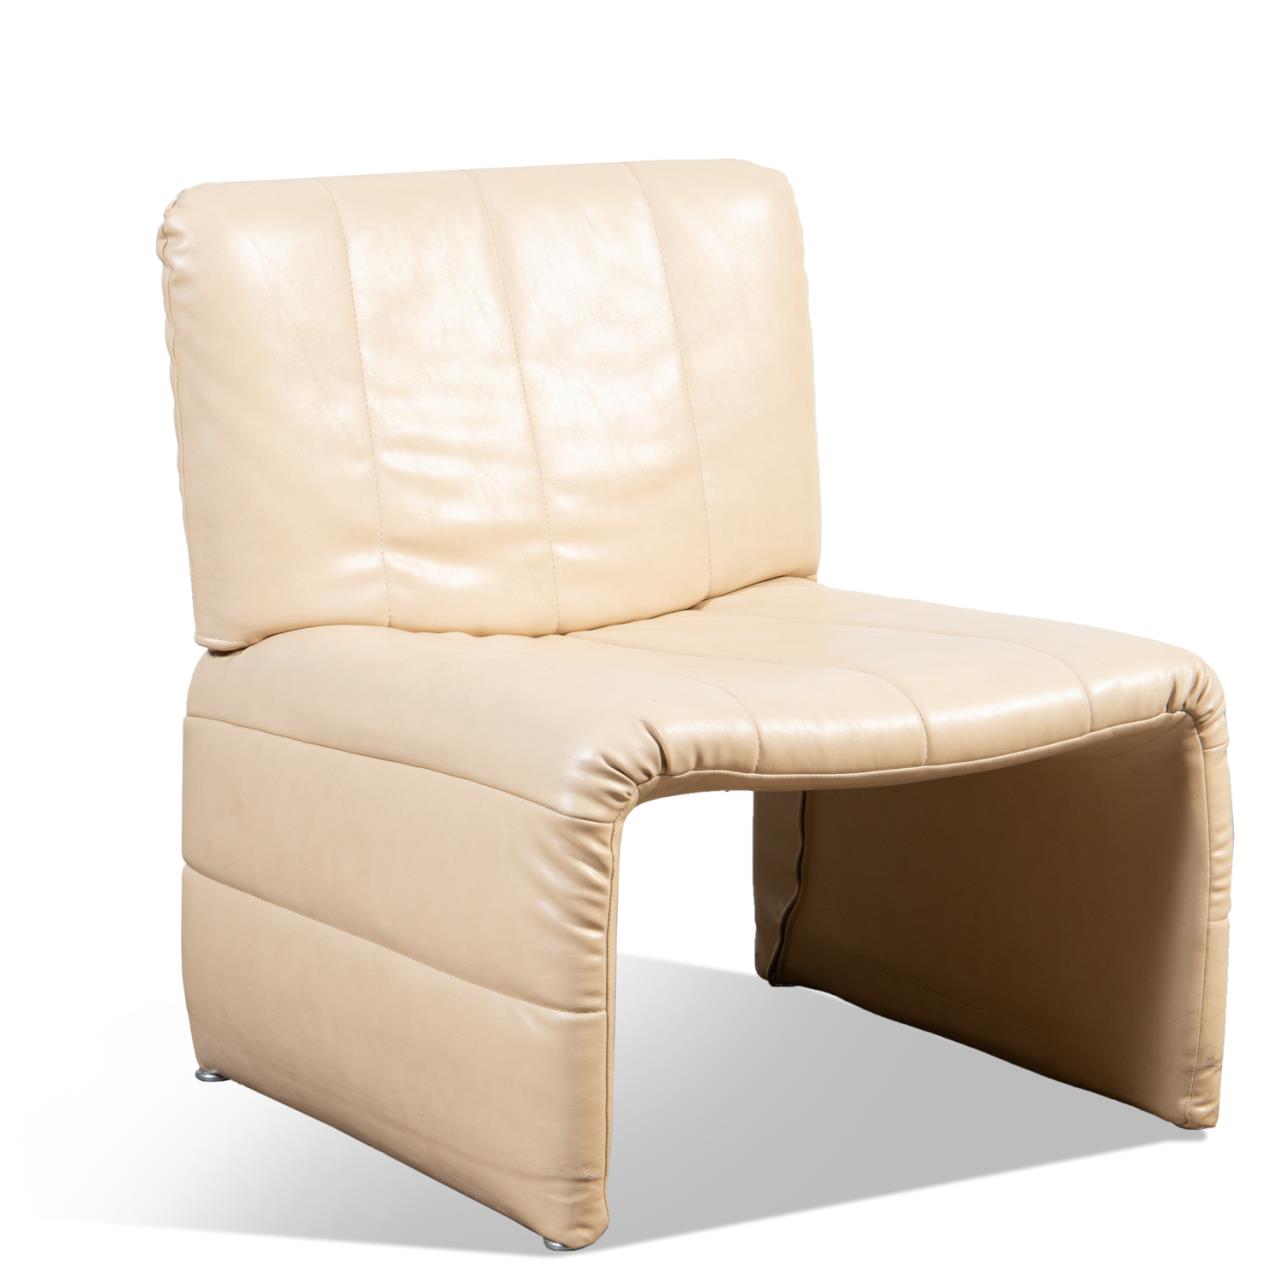 ALKY STYLE CREAM LEATHER UPHOLSTERED 29f94c